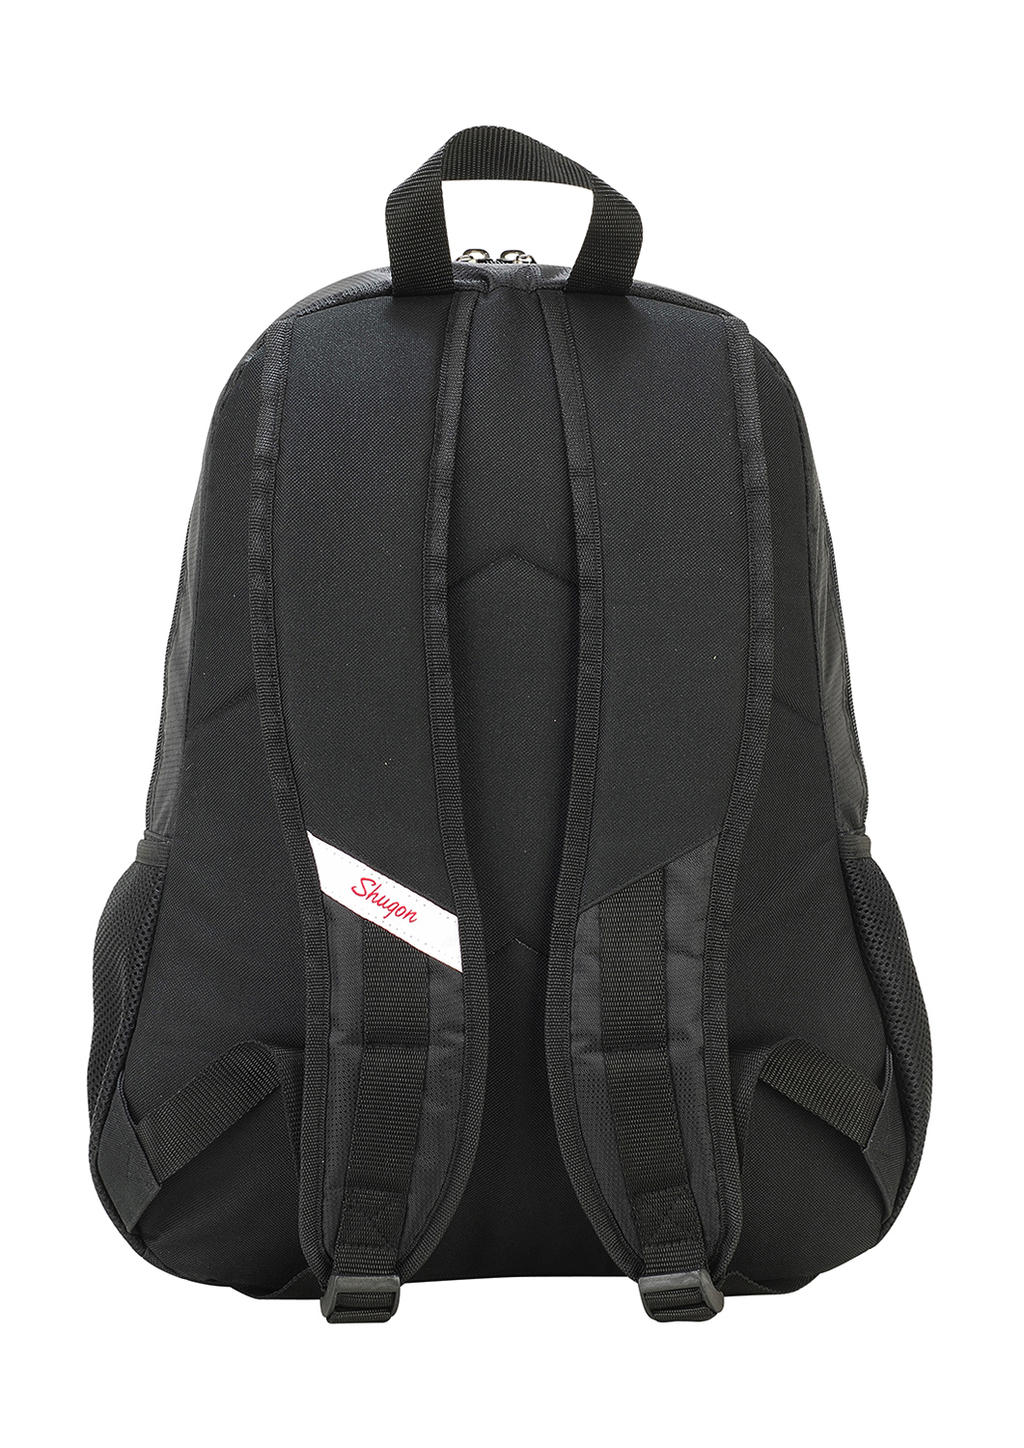  Zurich Classic Laptop Backpack in Farbe Black